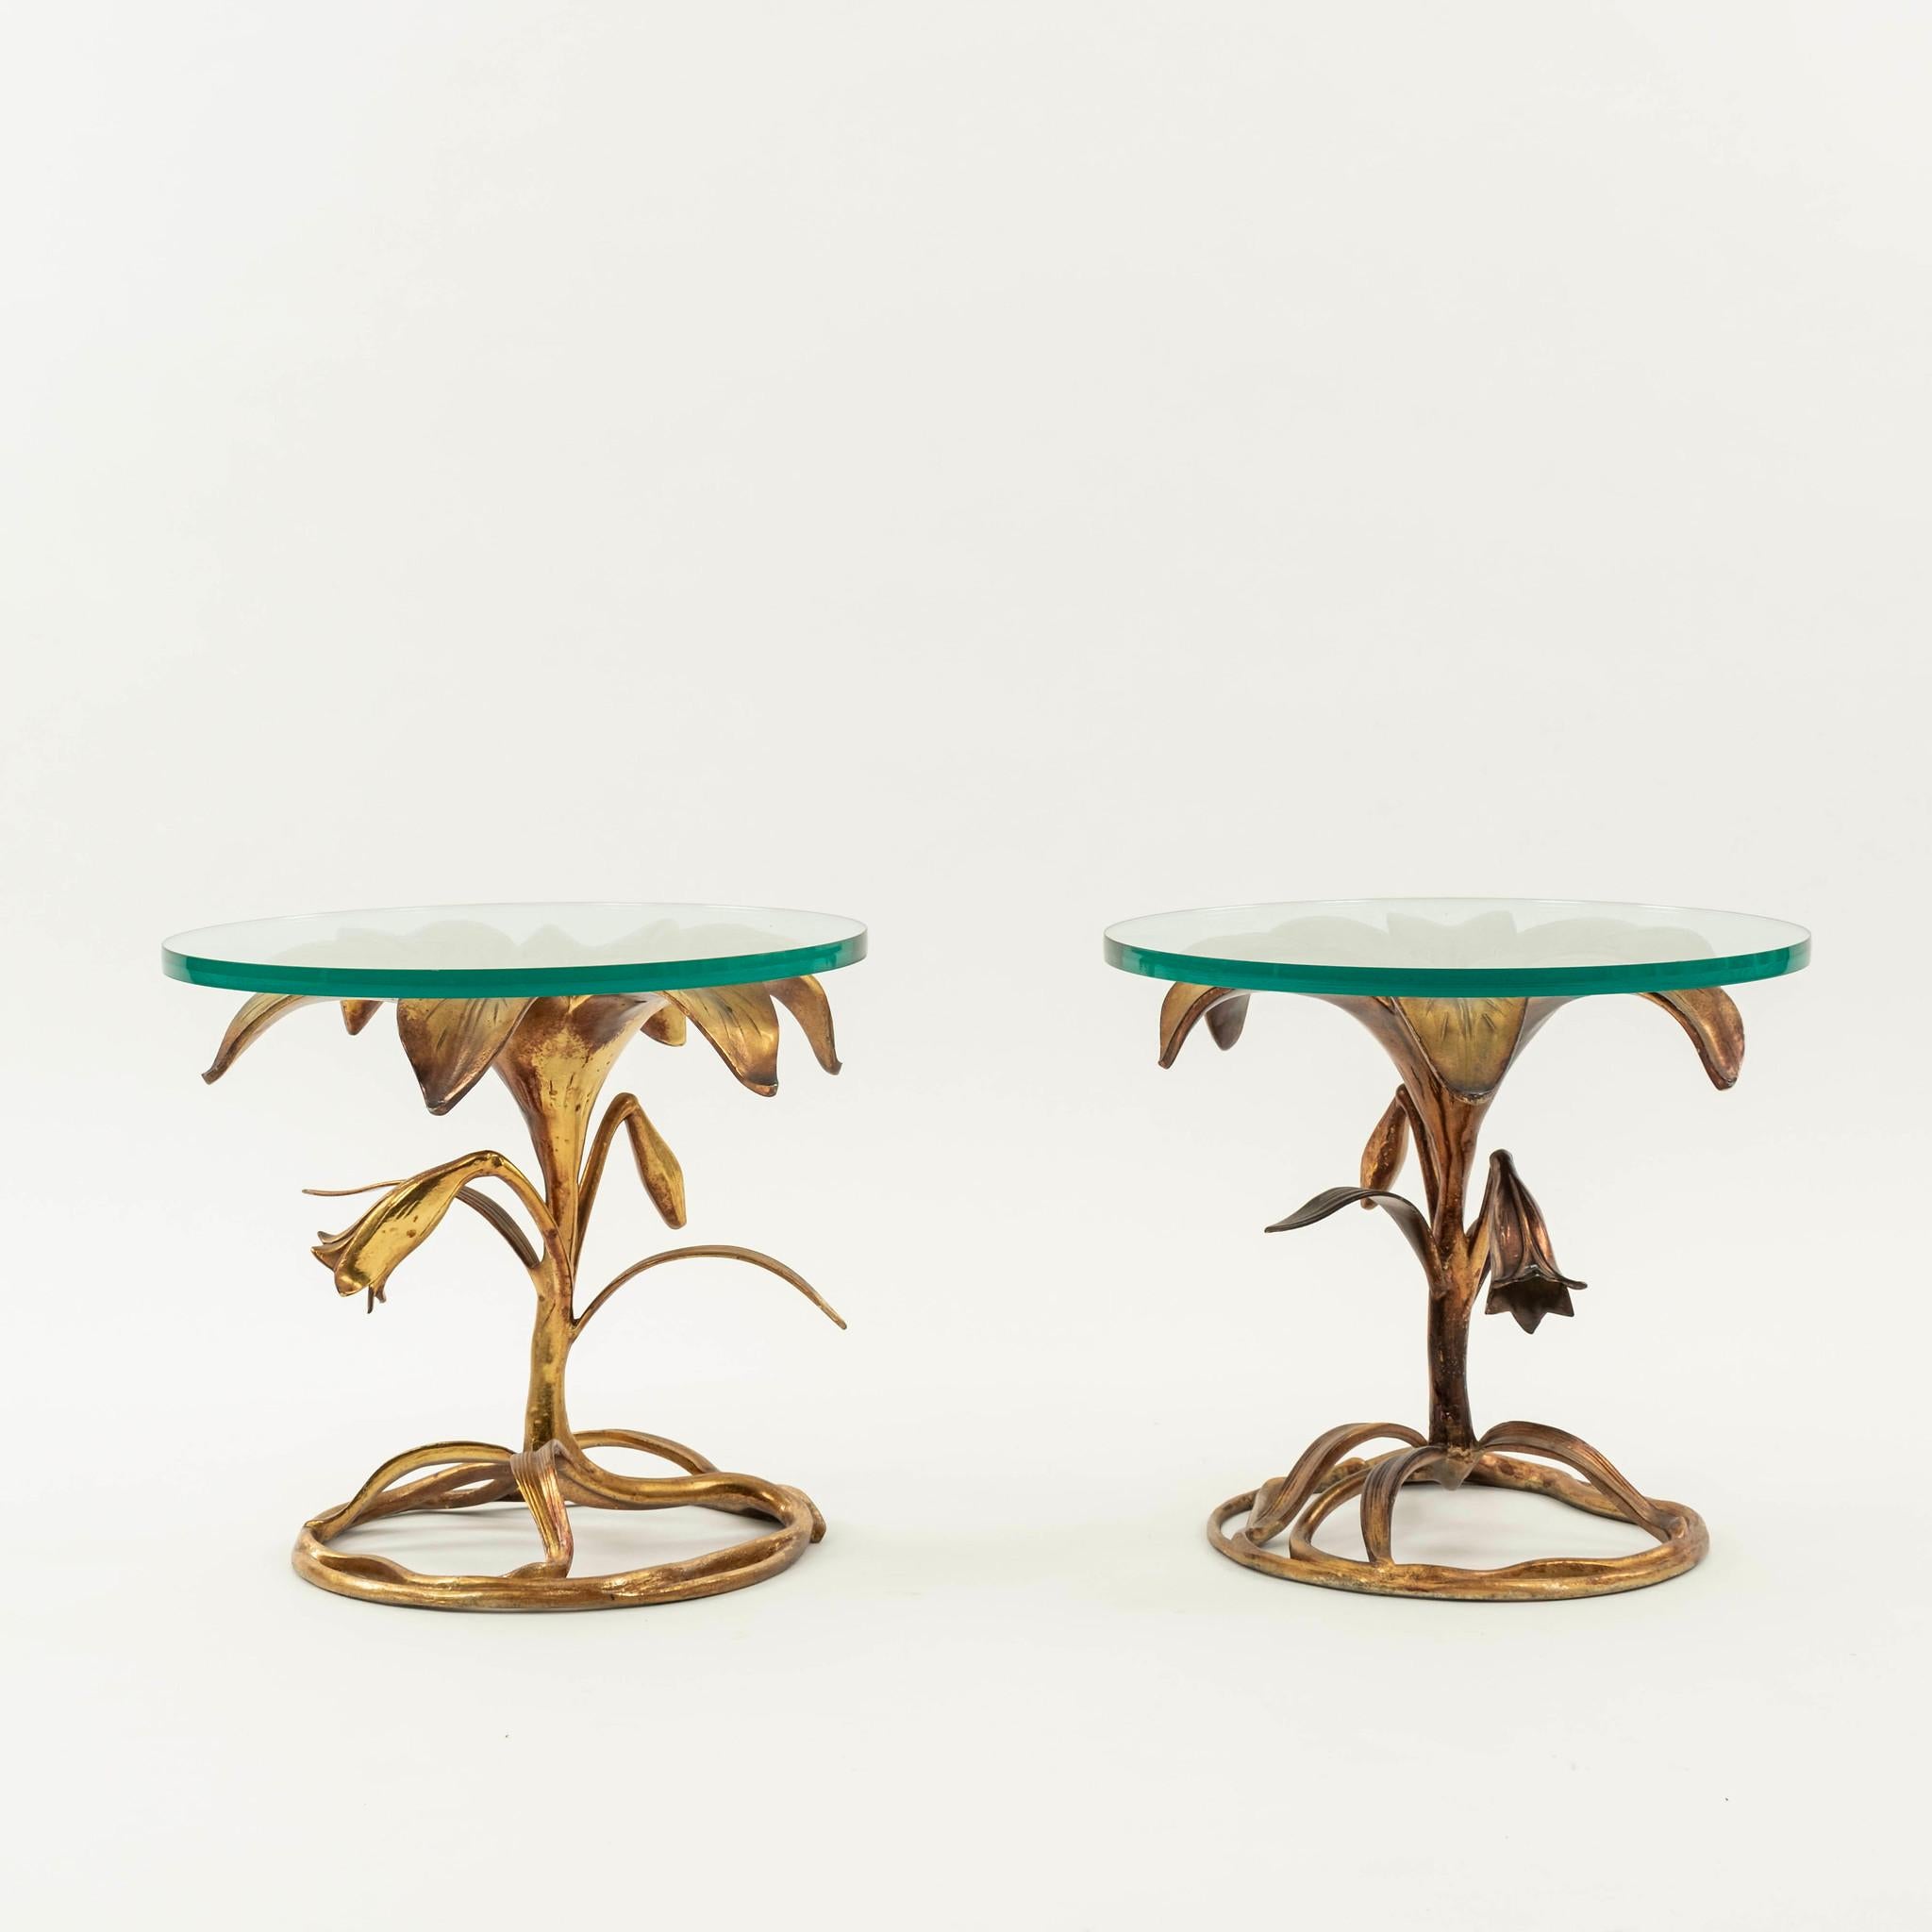 A lovely pair of vintage Arthur Court gilt metal lily occasional tables with new showroom glass.